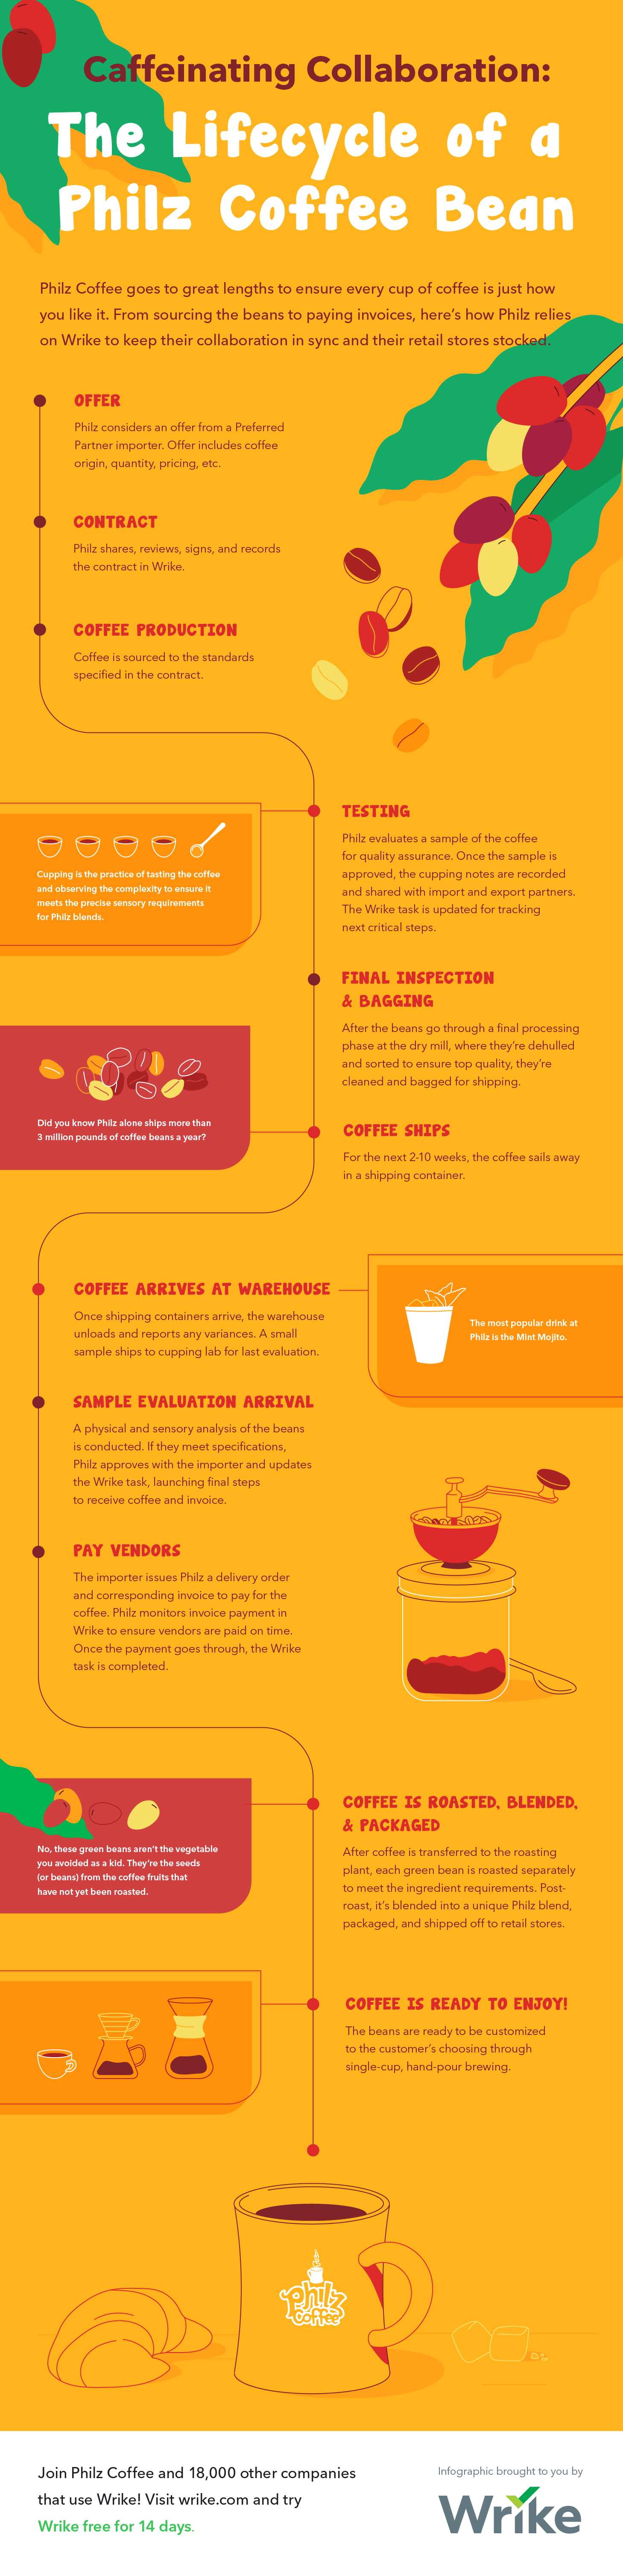 Philz_Coffee_Infographic_Caffinating_Collaboration_1